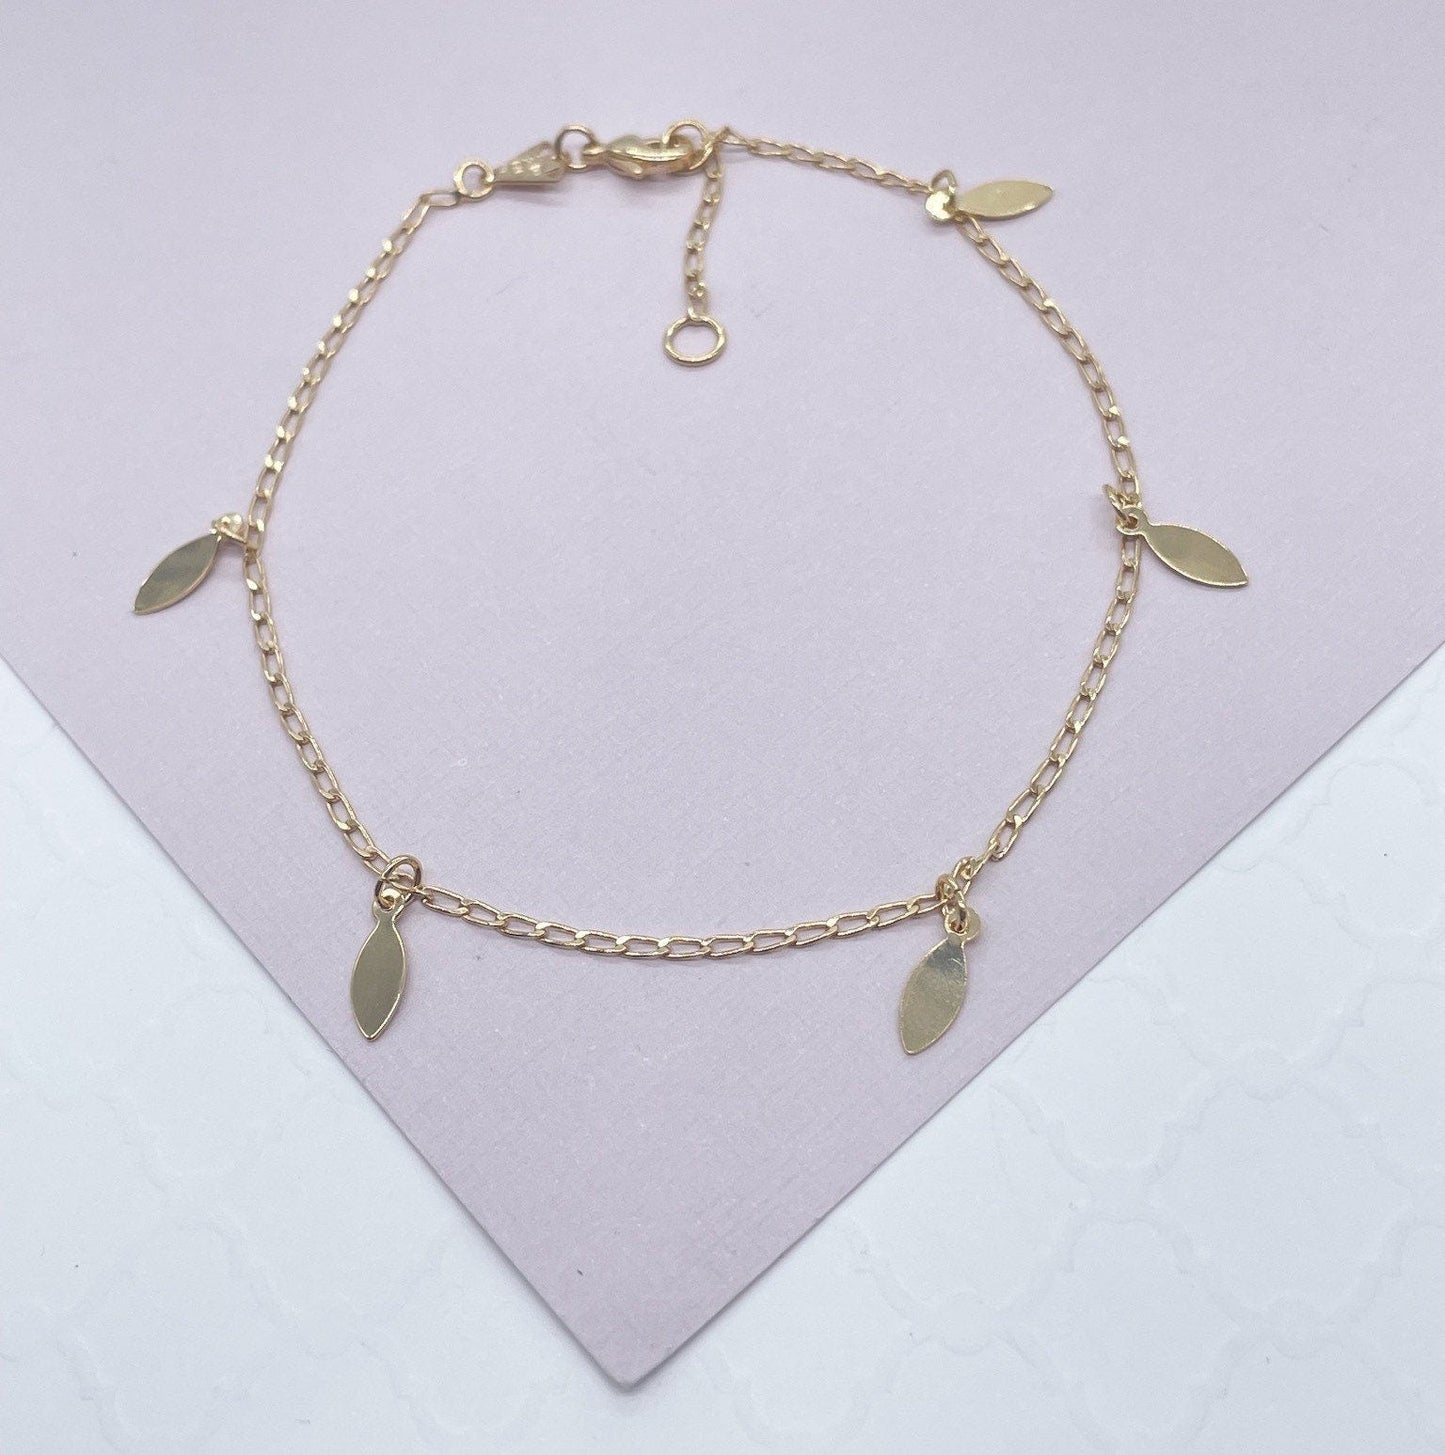 CO - 18k Gold Layered Charm Anklet Featuring Options In Heart or Leaves Wholesale